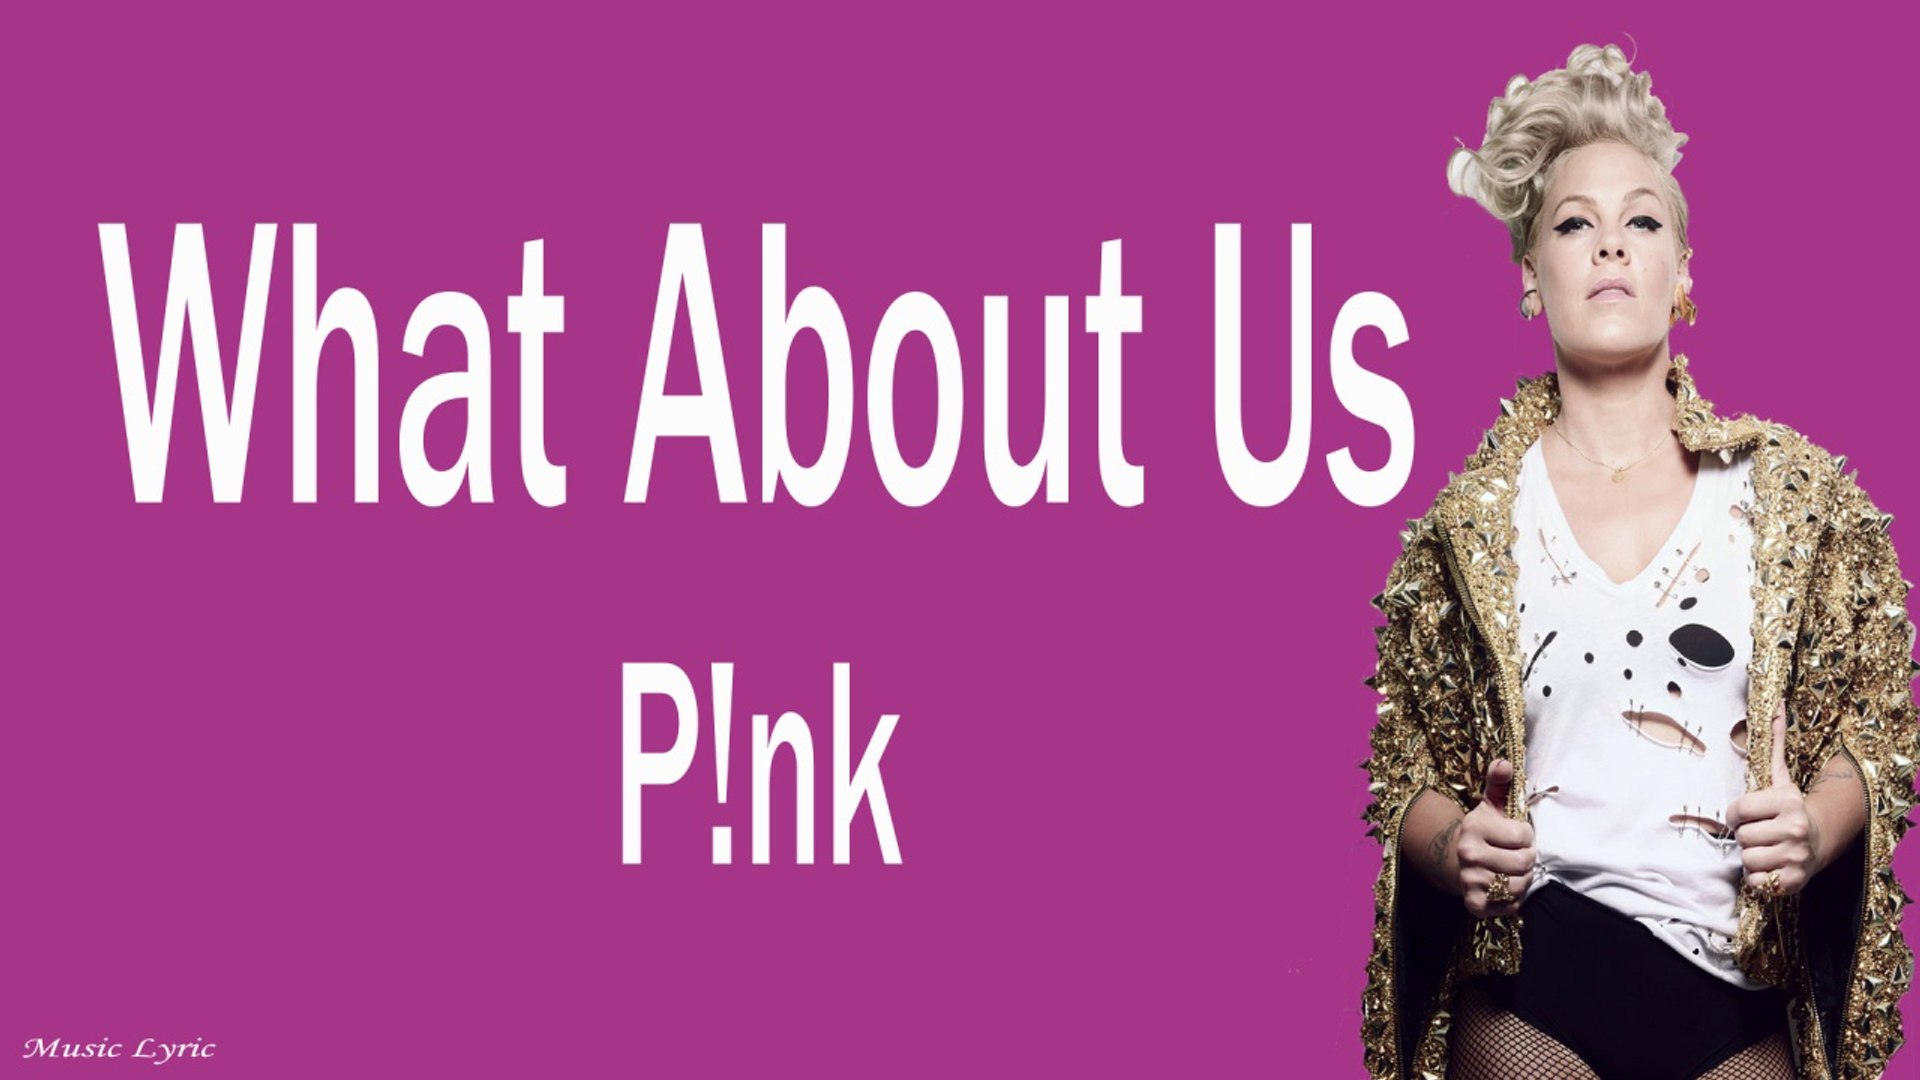 P!nk - What About Us Cover Lyric - video Dailymotion